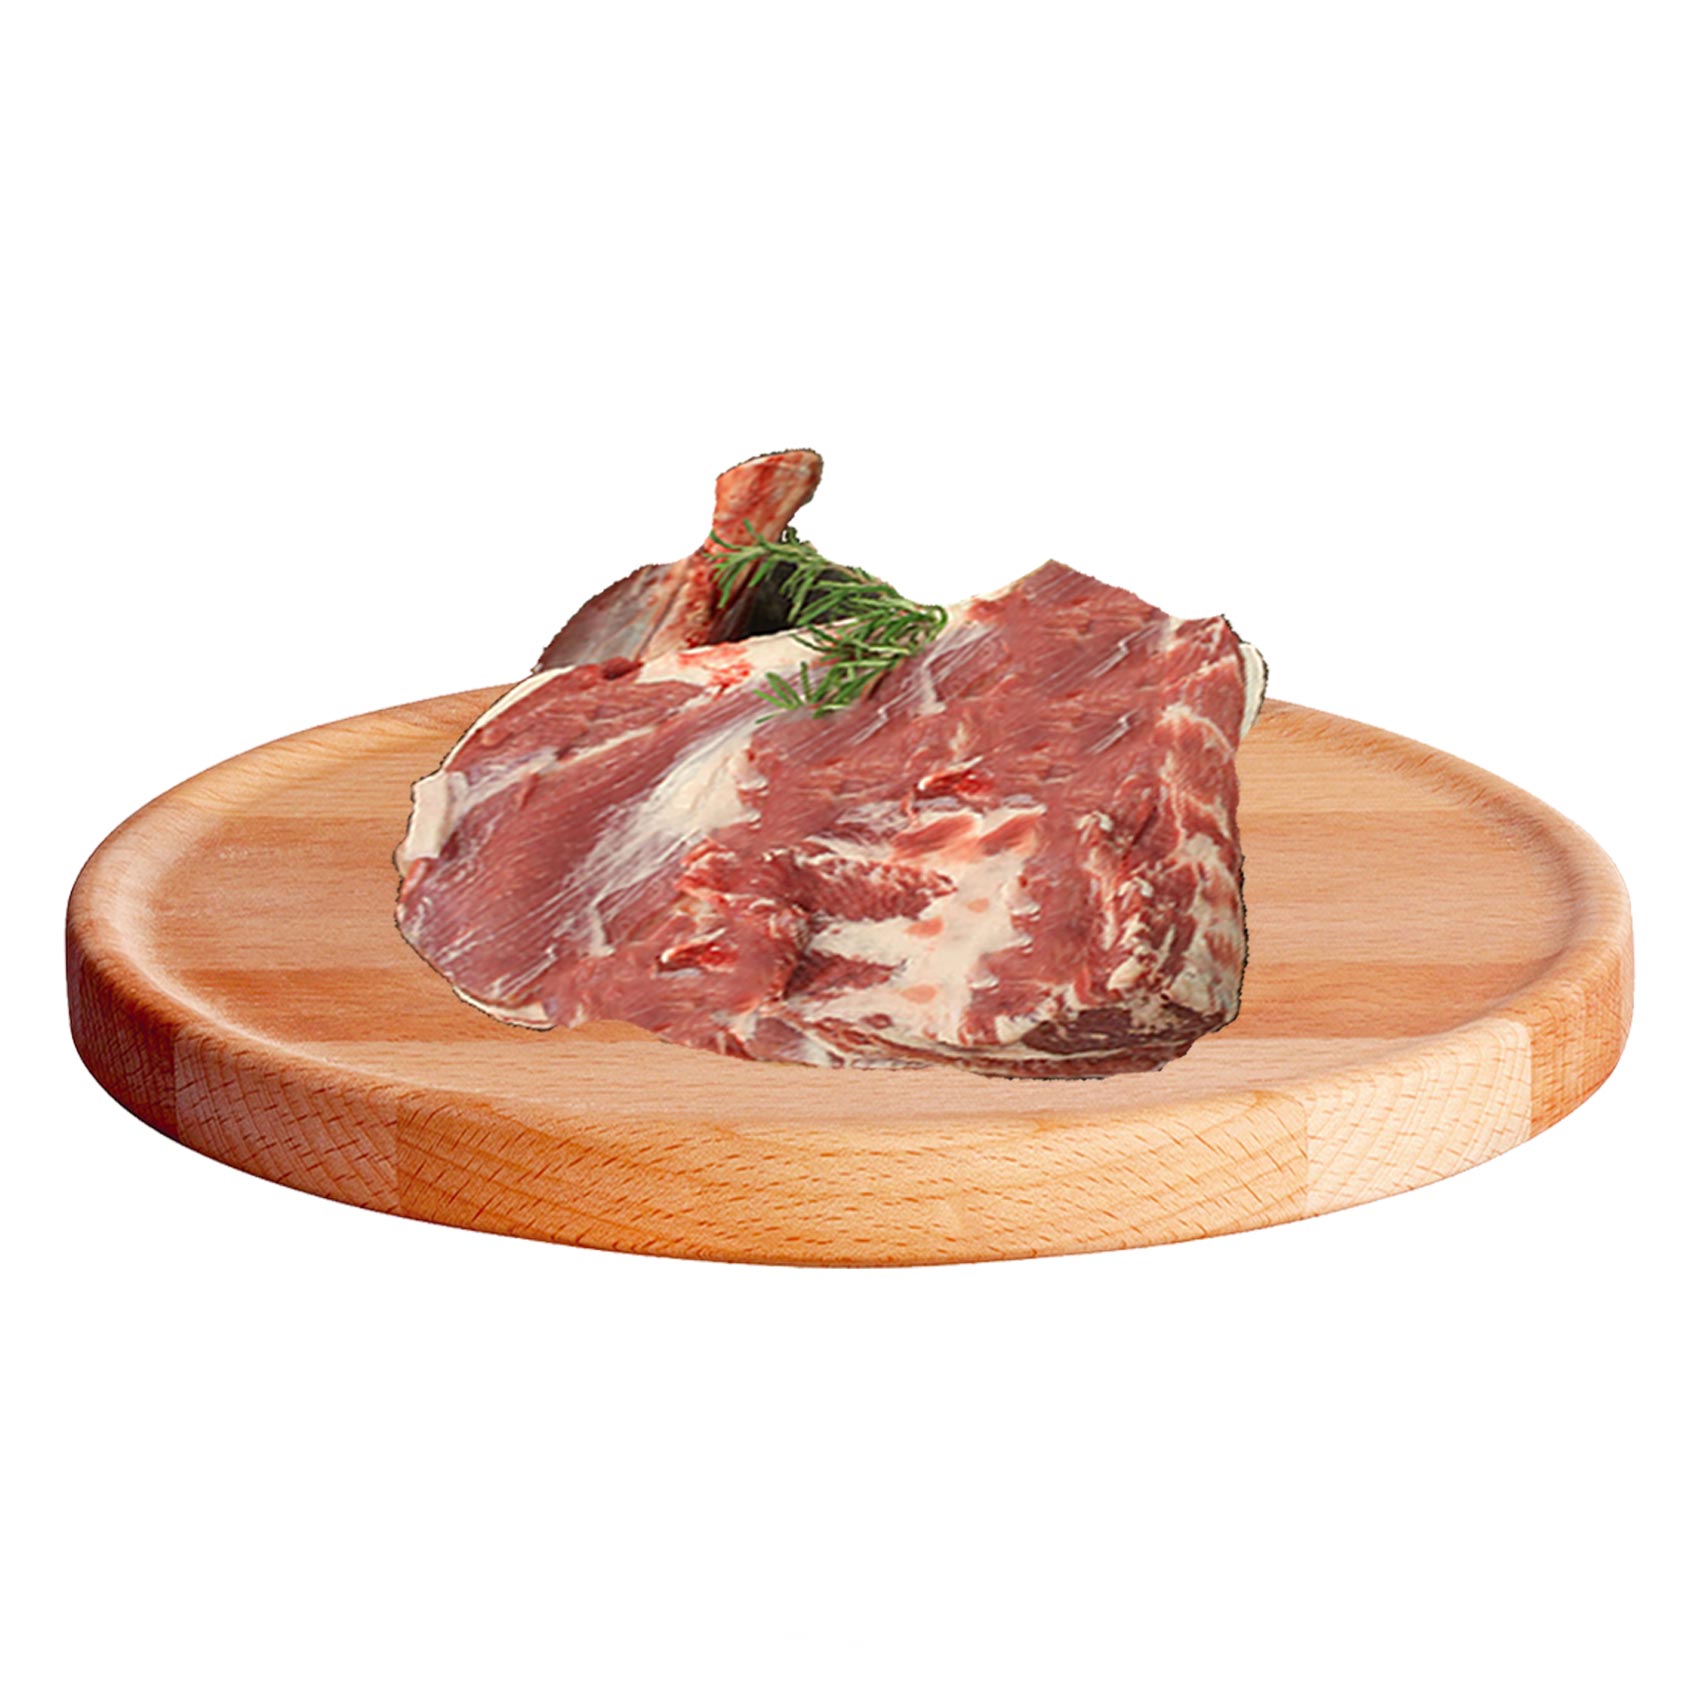 Local Lamb Shoulder With Neck